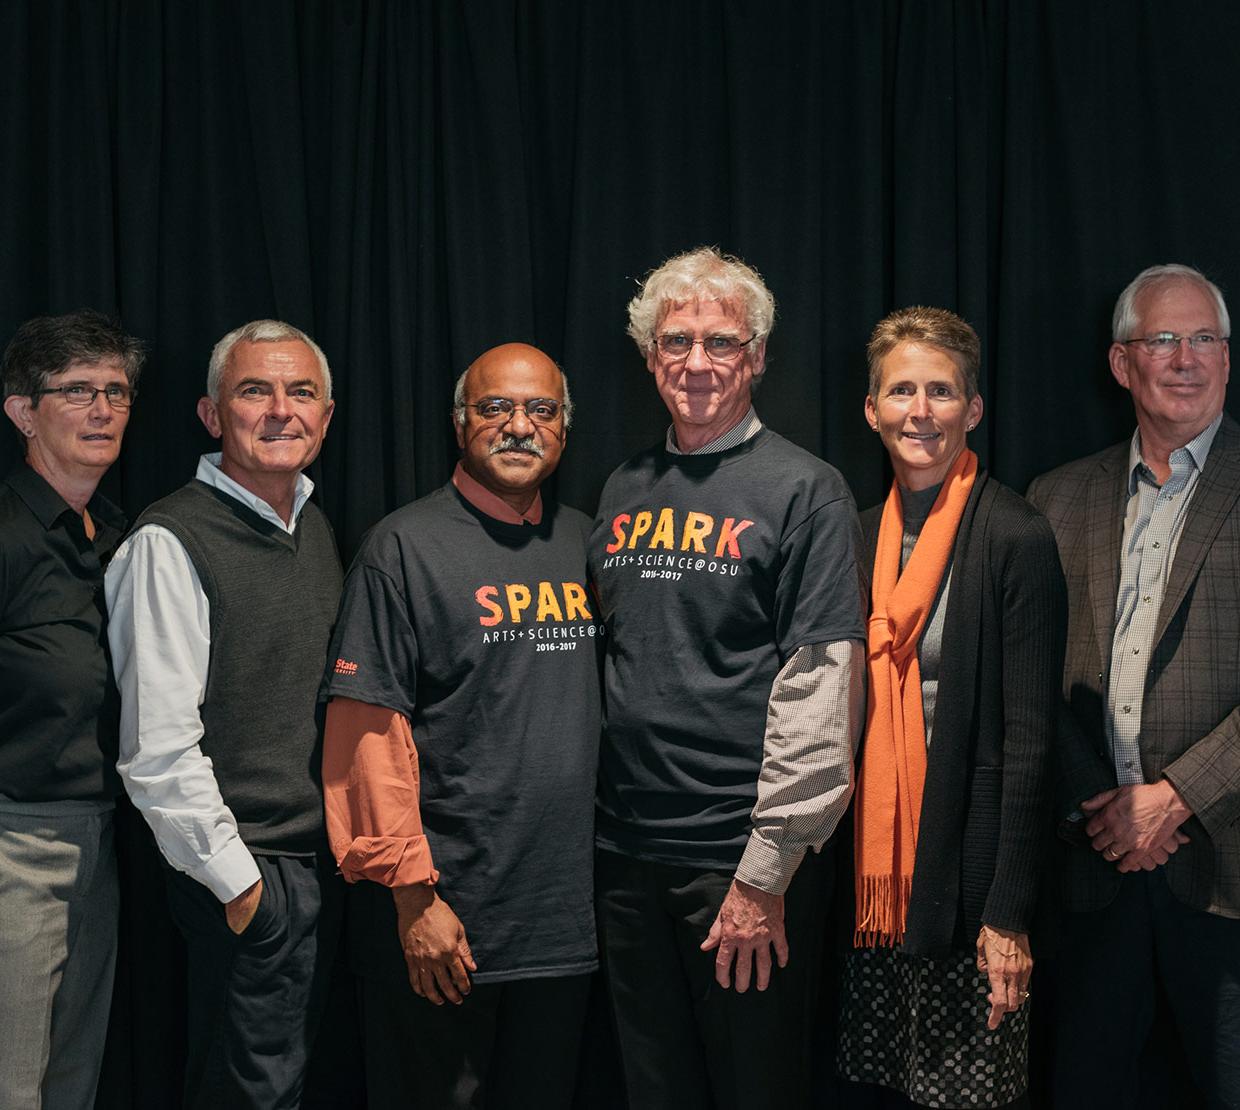 group picture of SPARK event leaders in event shirts